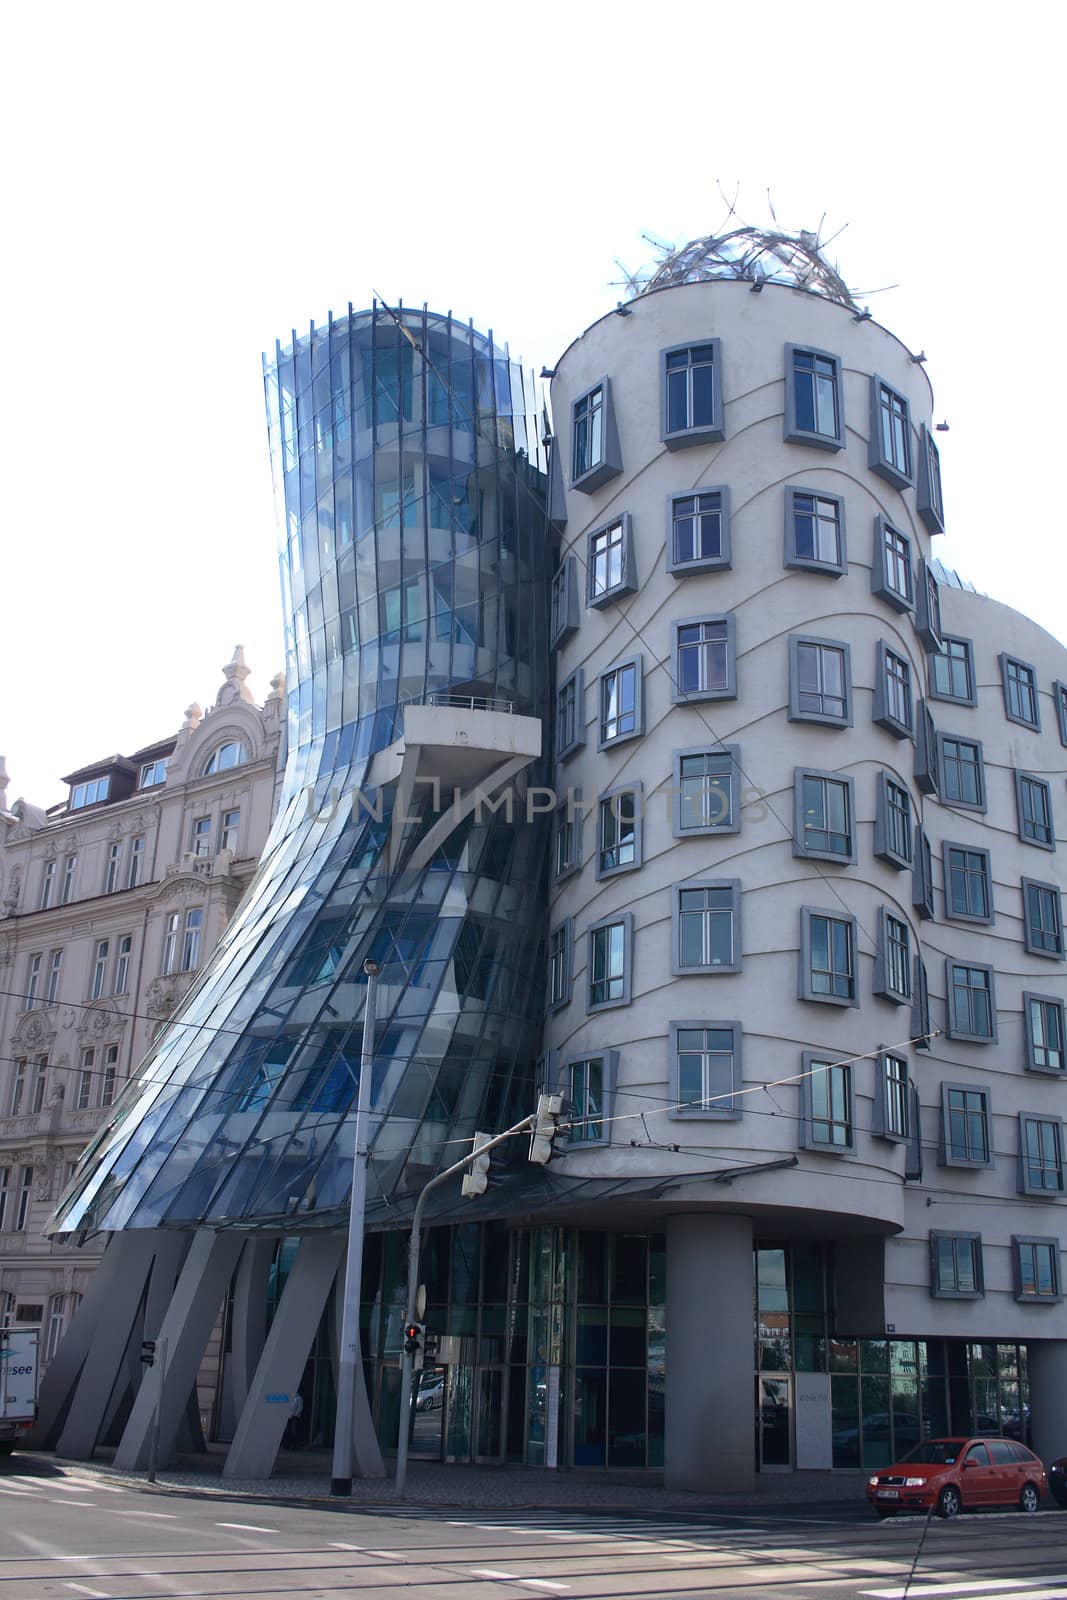 example of modern architecture - dancing house in the Prague